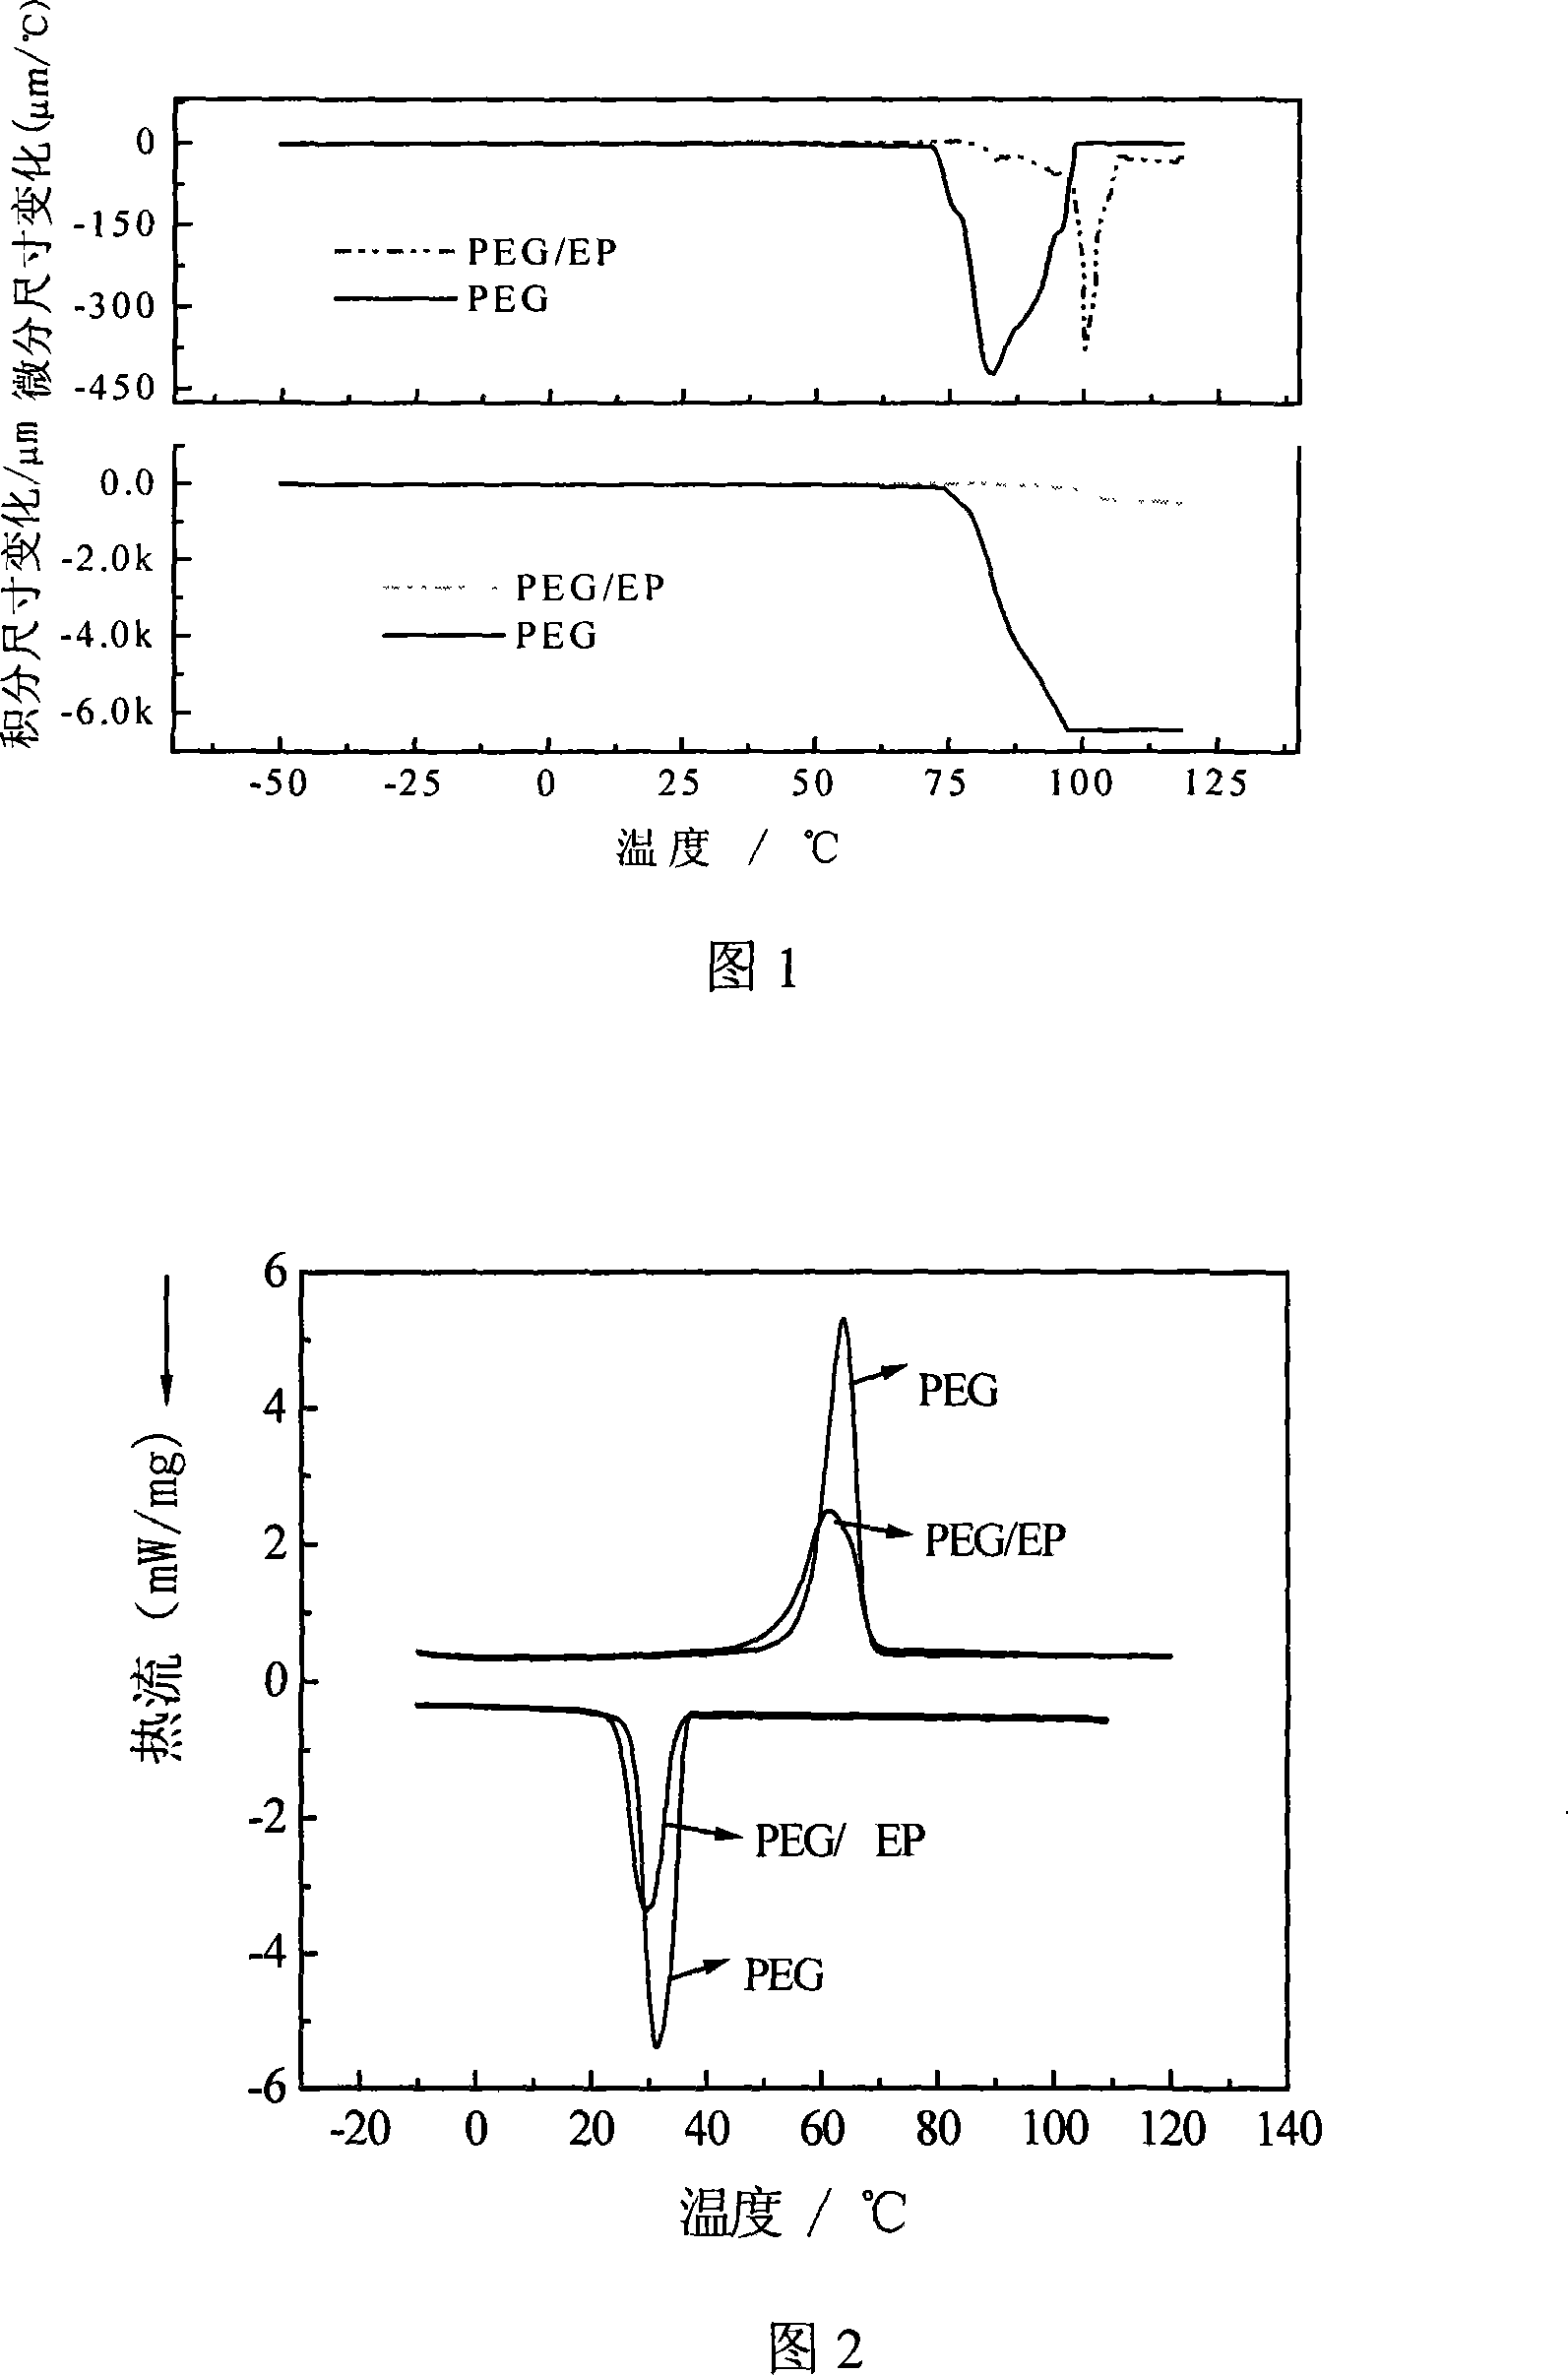 Method for preparing polyethylene glycol and epoxy resin formed composite phase-change materials